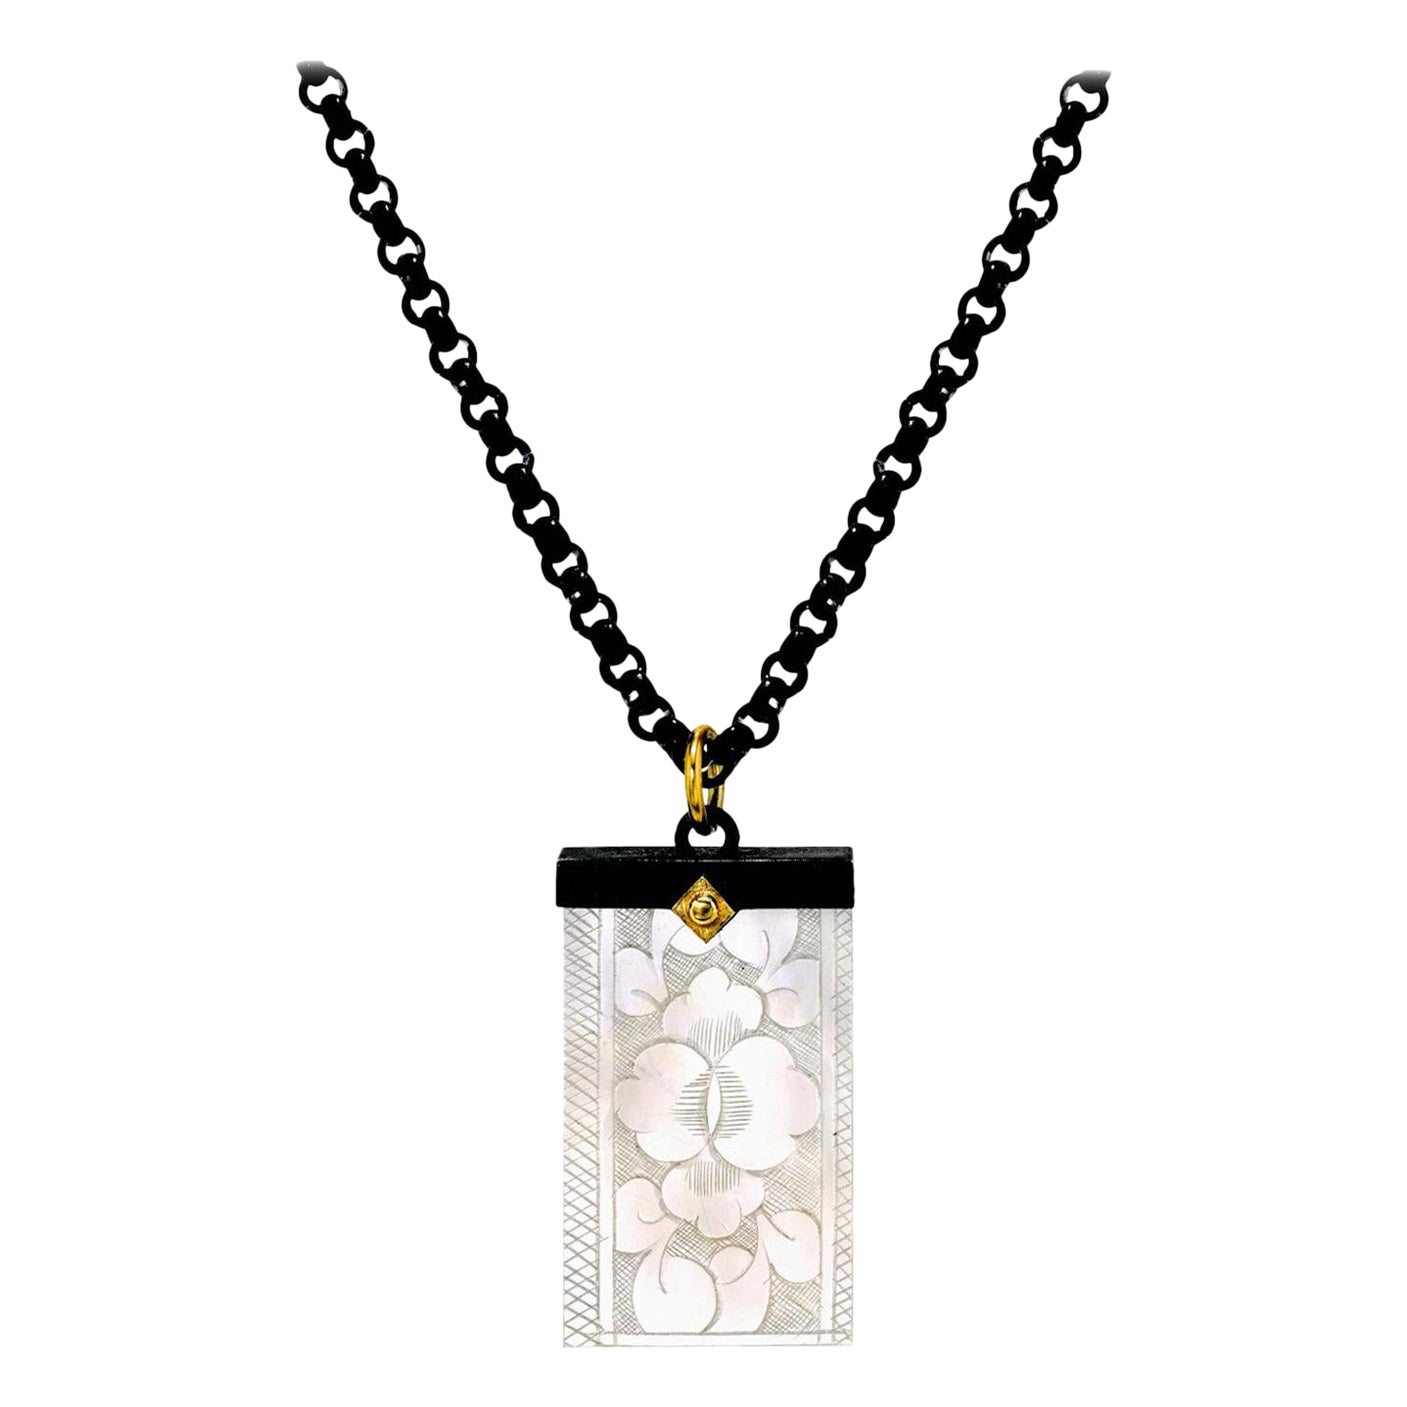 This necklace features an antique mother-of-pearl gaming counter that was carved in China for export to Britain during the late 1700's-early 1800's. The British used these beautiful counters to play games and gamble with. (Please refer to the